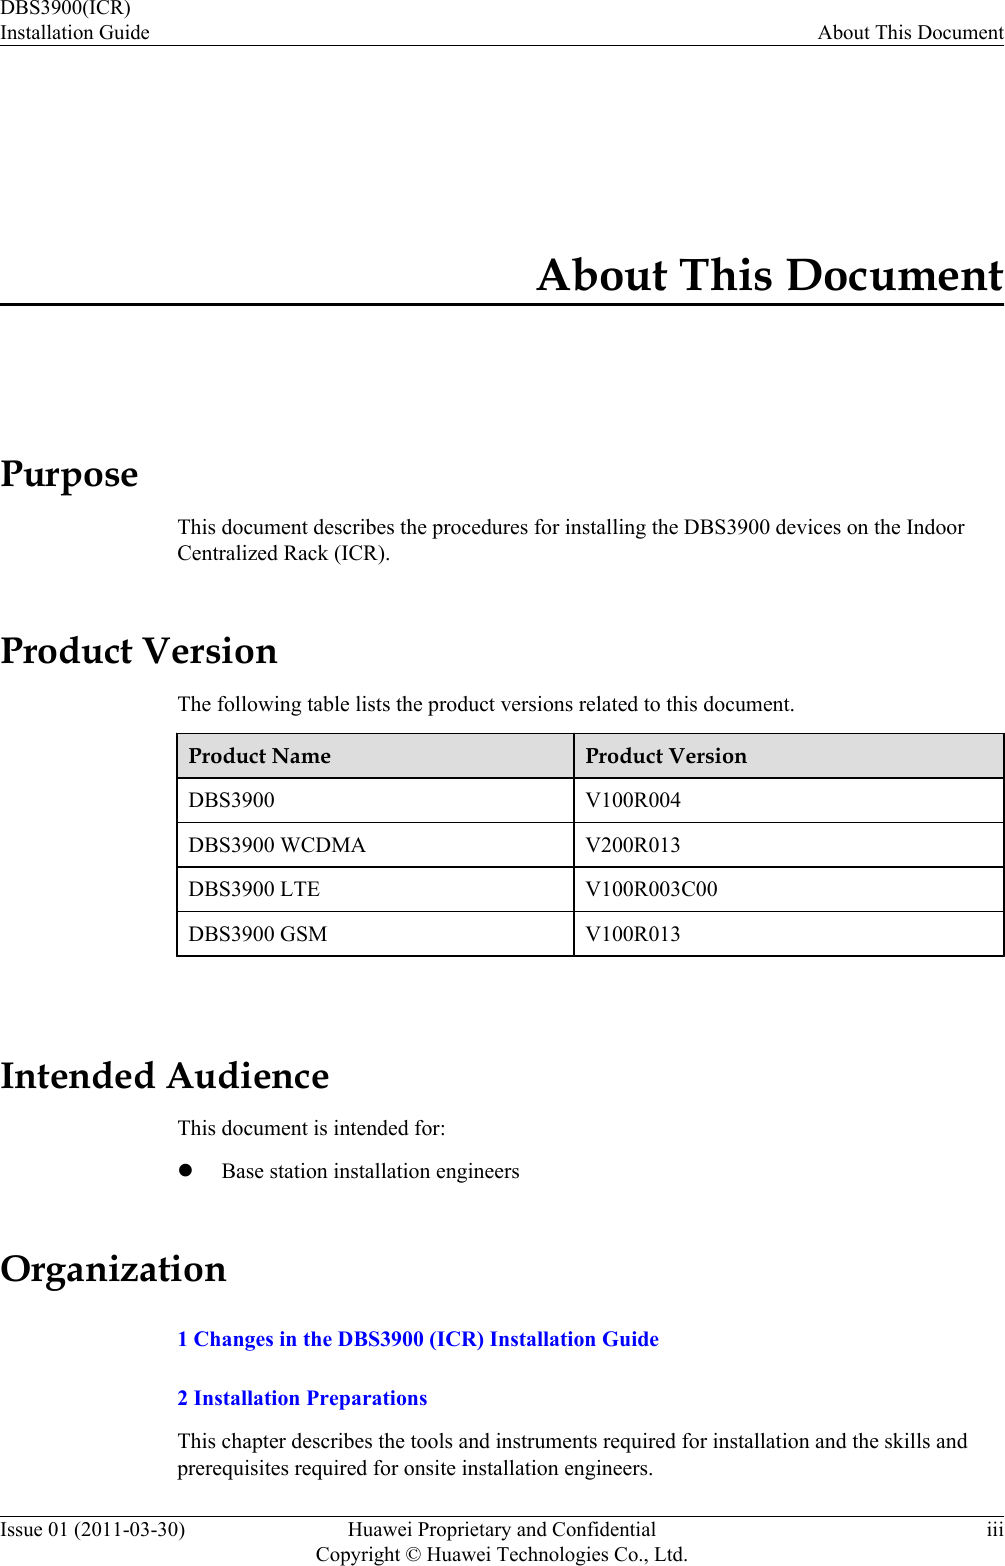 About This DocumentPurposeThis document describes the procedures for installing the DBS3900 devices on the IndoorCentralized Rack (ICR).Product VersionThe following table lists the product versions related to this document.Product Name Product VersionDBS3900 V100R004DBS3900 WCDMA V200R013DBS3900 LTE V100R003C00DBS3900 GSM V100R013 Intended AudienceThis document is intended for:lBase station installation engineersOrganization1 Changes in the DBS3900 (ICR) Installation Guide2 Installation PreparationsThis chapter describes the tools and instruments required for installation and the skills andprerequisites required for onsite installation engineers.DBS3900(ICR)Installation Guide About This DocumentIssue 01 (2011-03-30) Huawei Proprietary and ConfidentialCopyright © Huawei Technologies Co., Ltd.iii